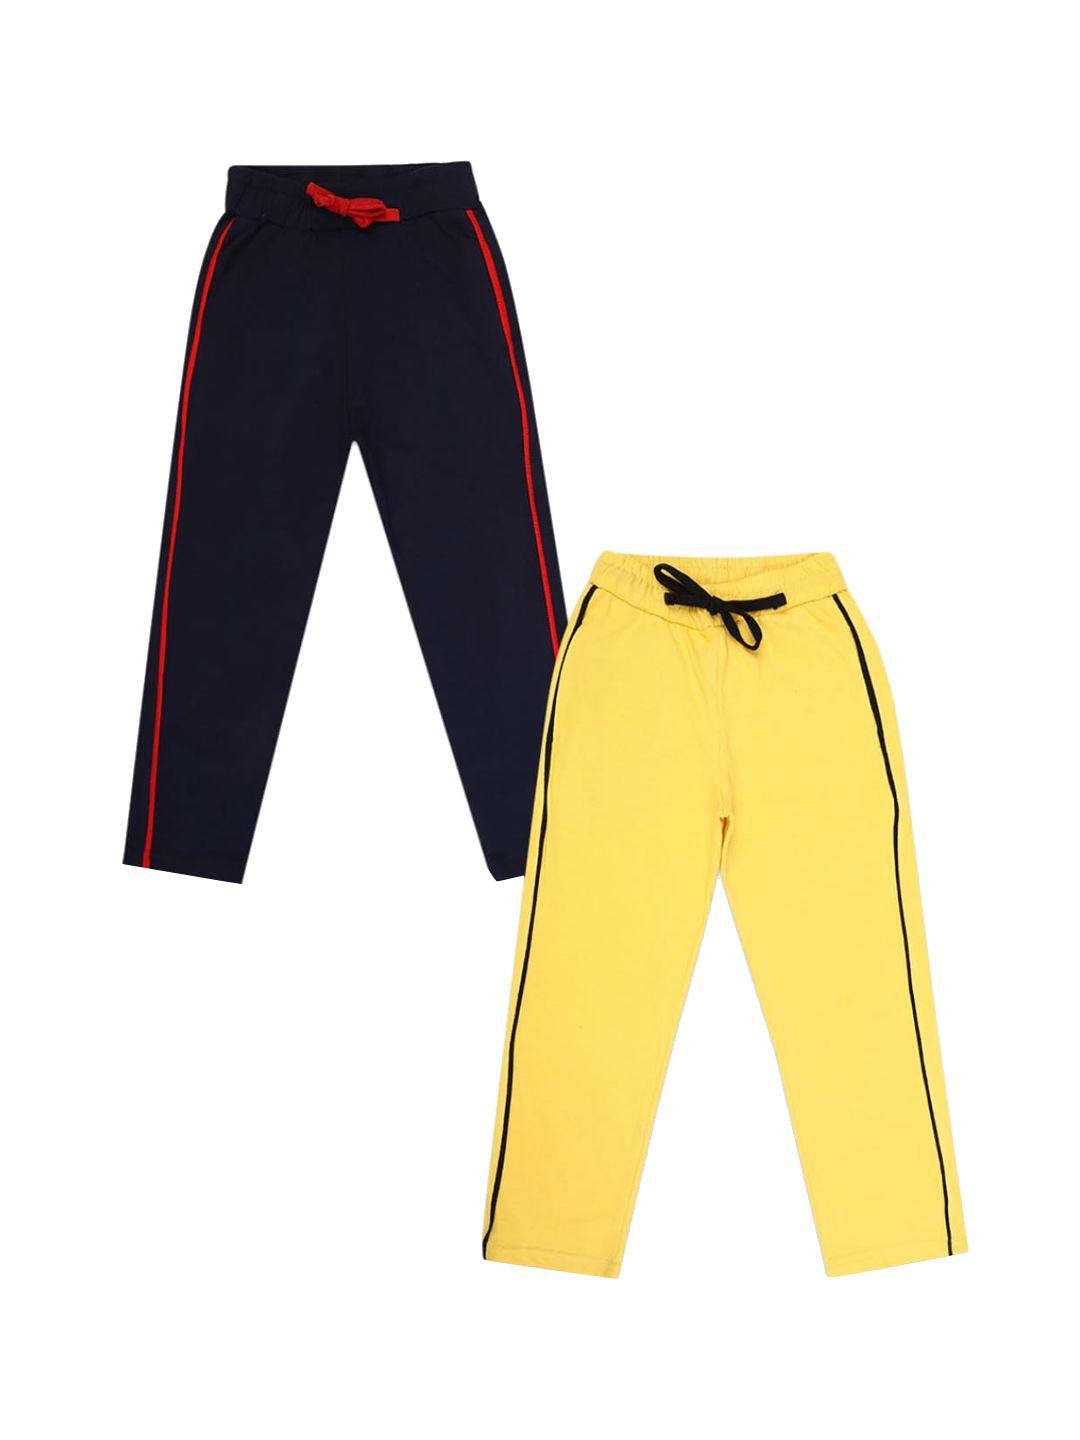 v-mart boys set of 2 yellow & navy blue solid cotton single jersey track pant